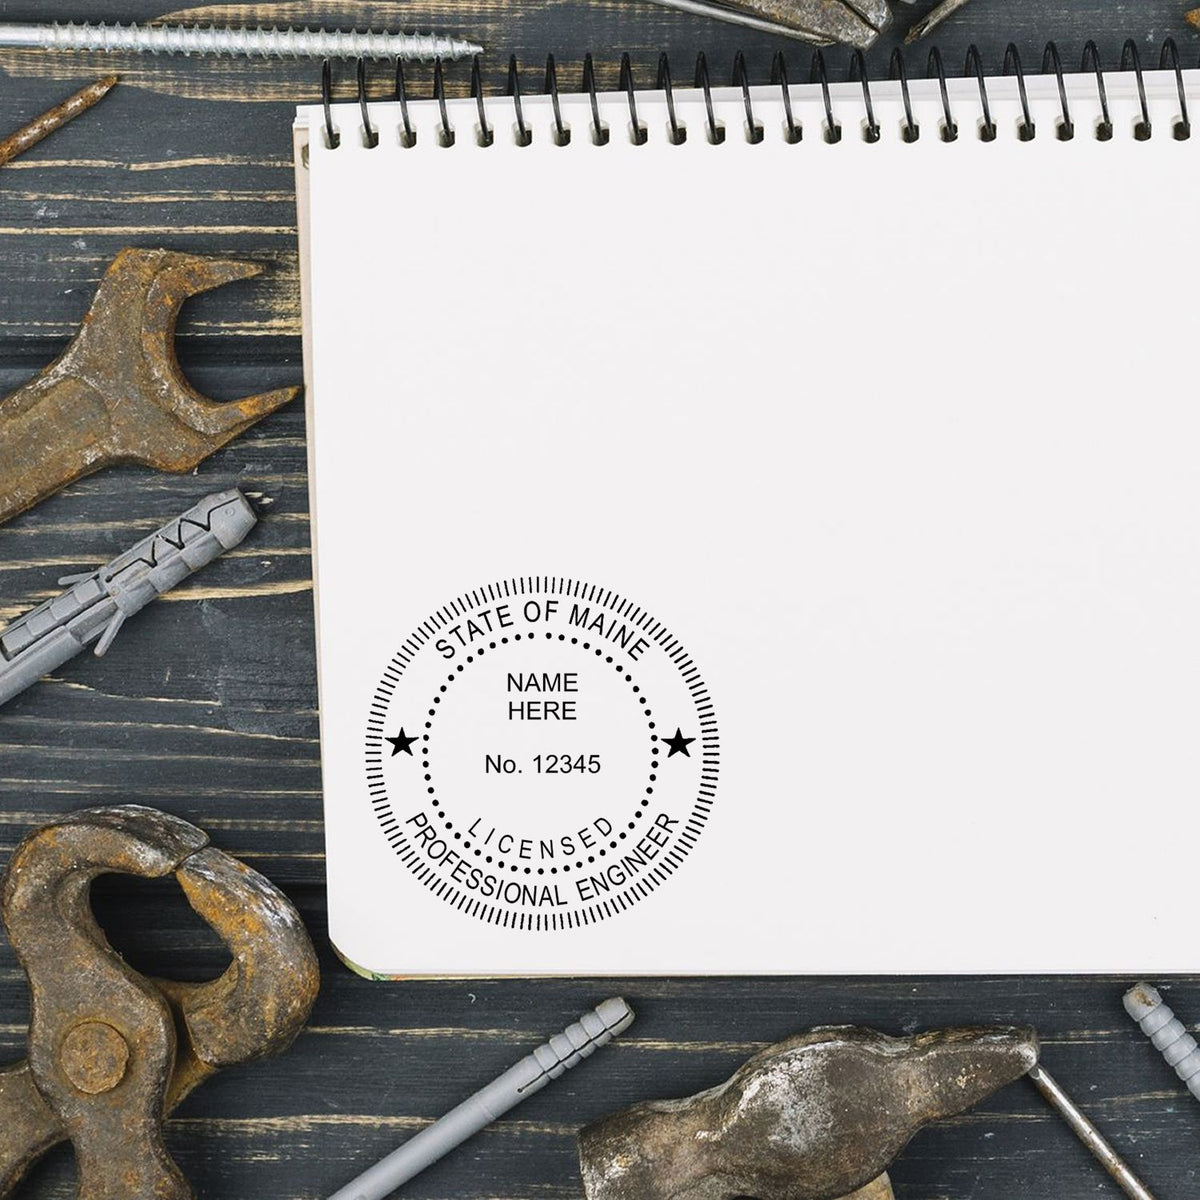 Another Example of a stamped impression of the Digital Maine PE Stamp and Electronic Seal for Maine Engineer on a piece of office paper.